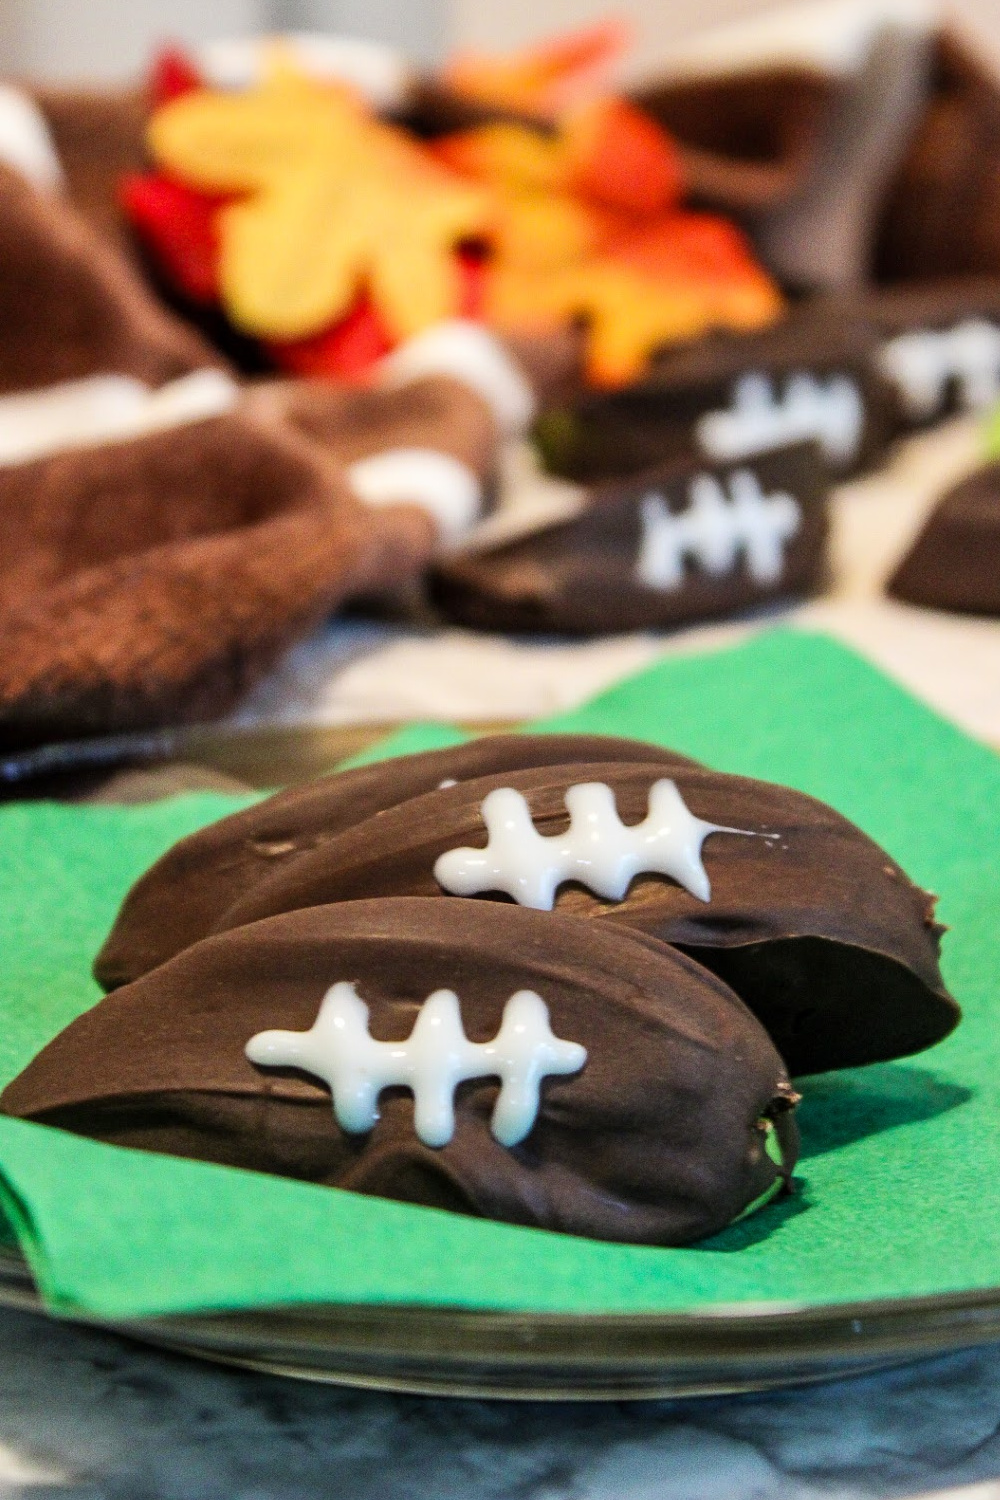 footballs that are covered with chocolate and shaped like footballs